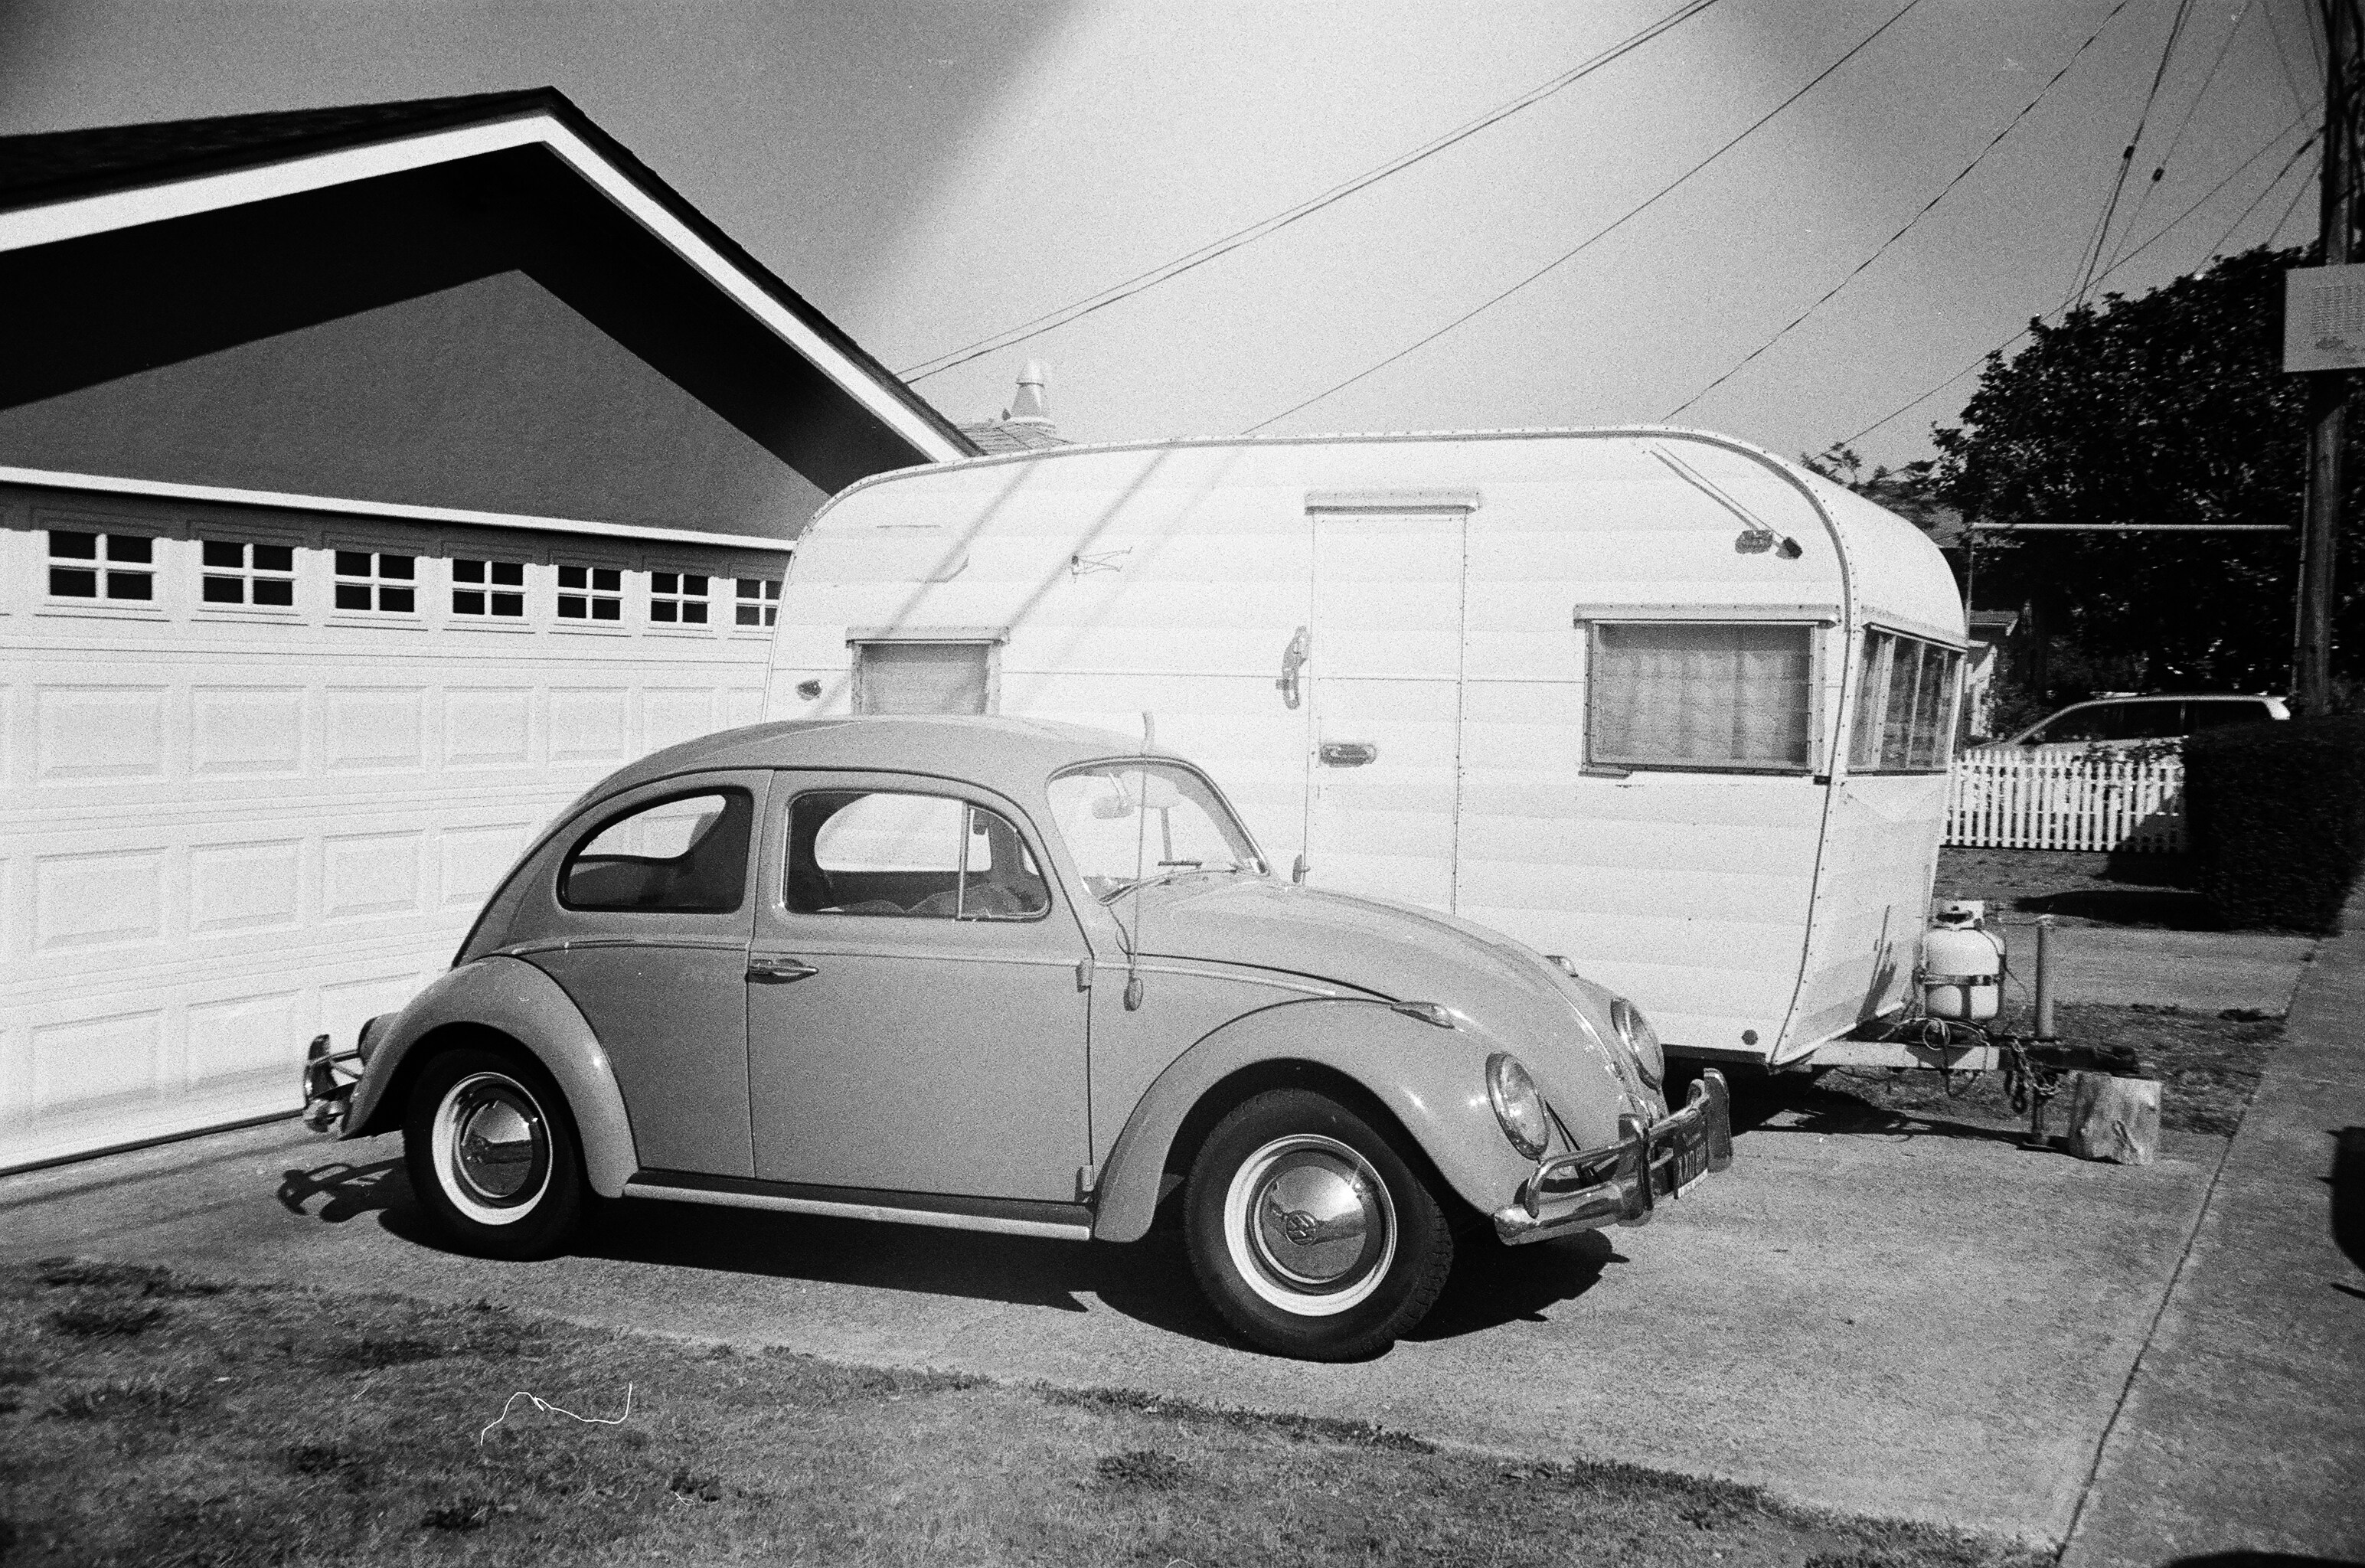 On the driveway of a Pacifica, CA home is a timeless collection of car and camper. Shot on film with a Nikon FE2.